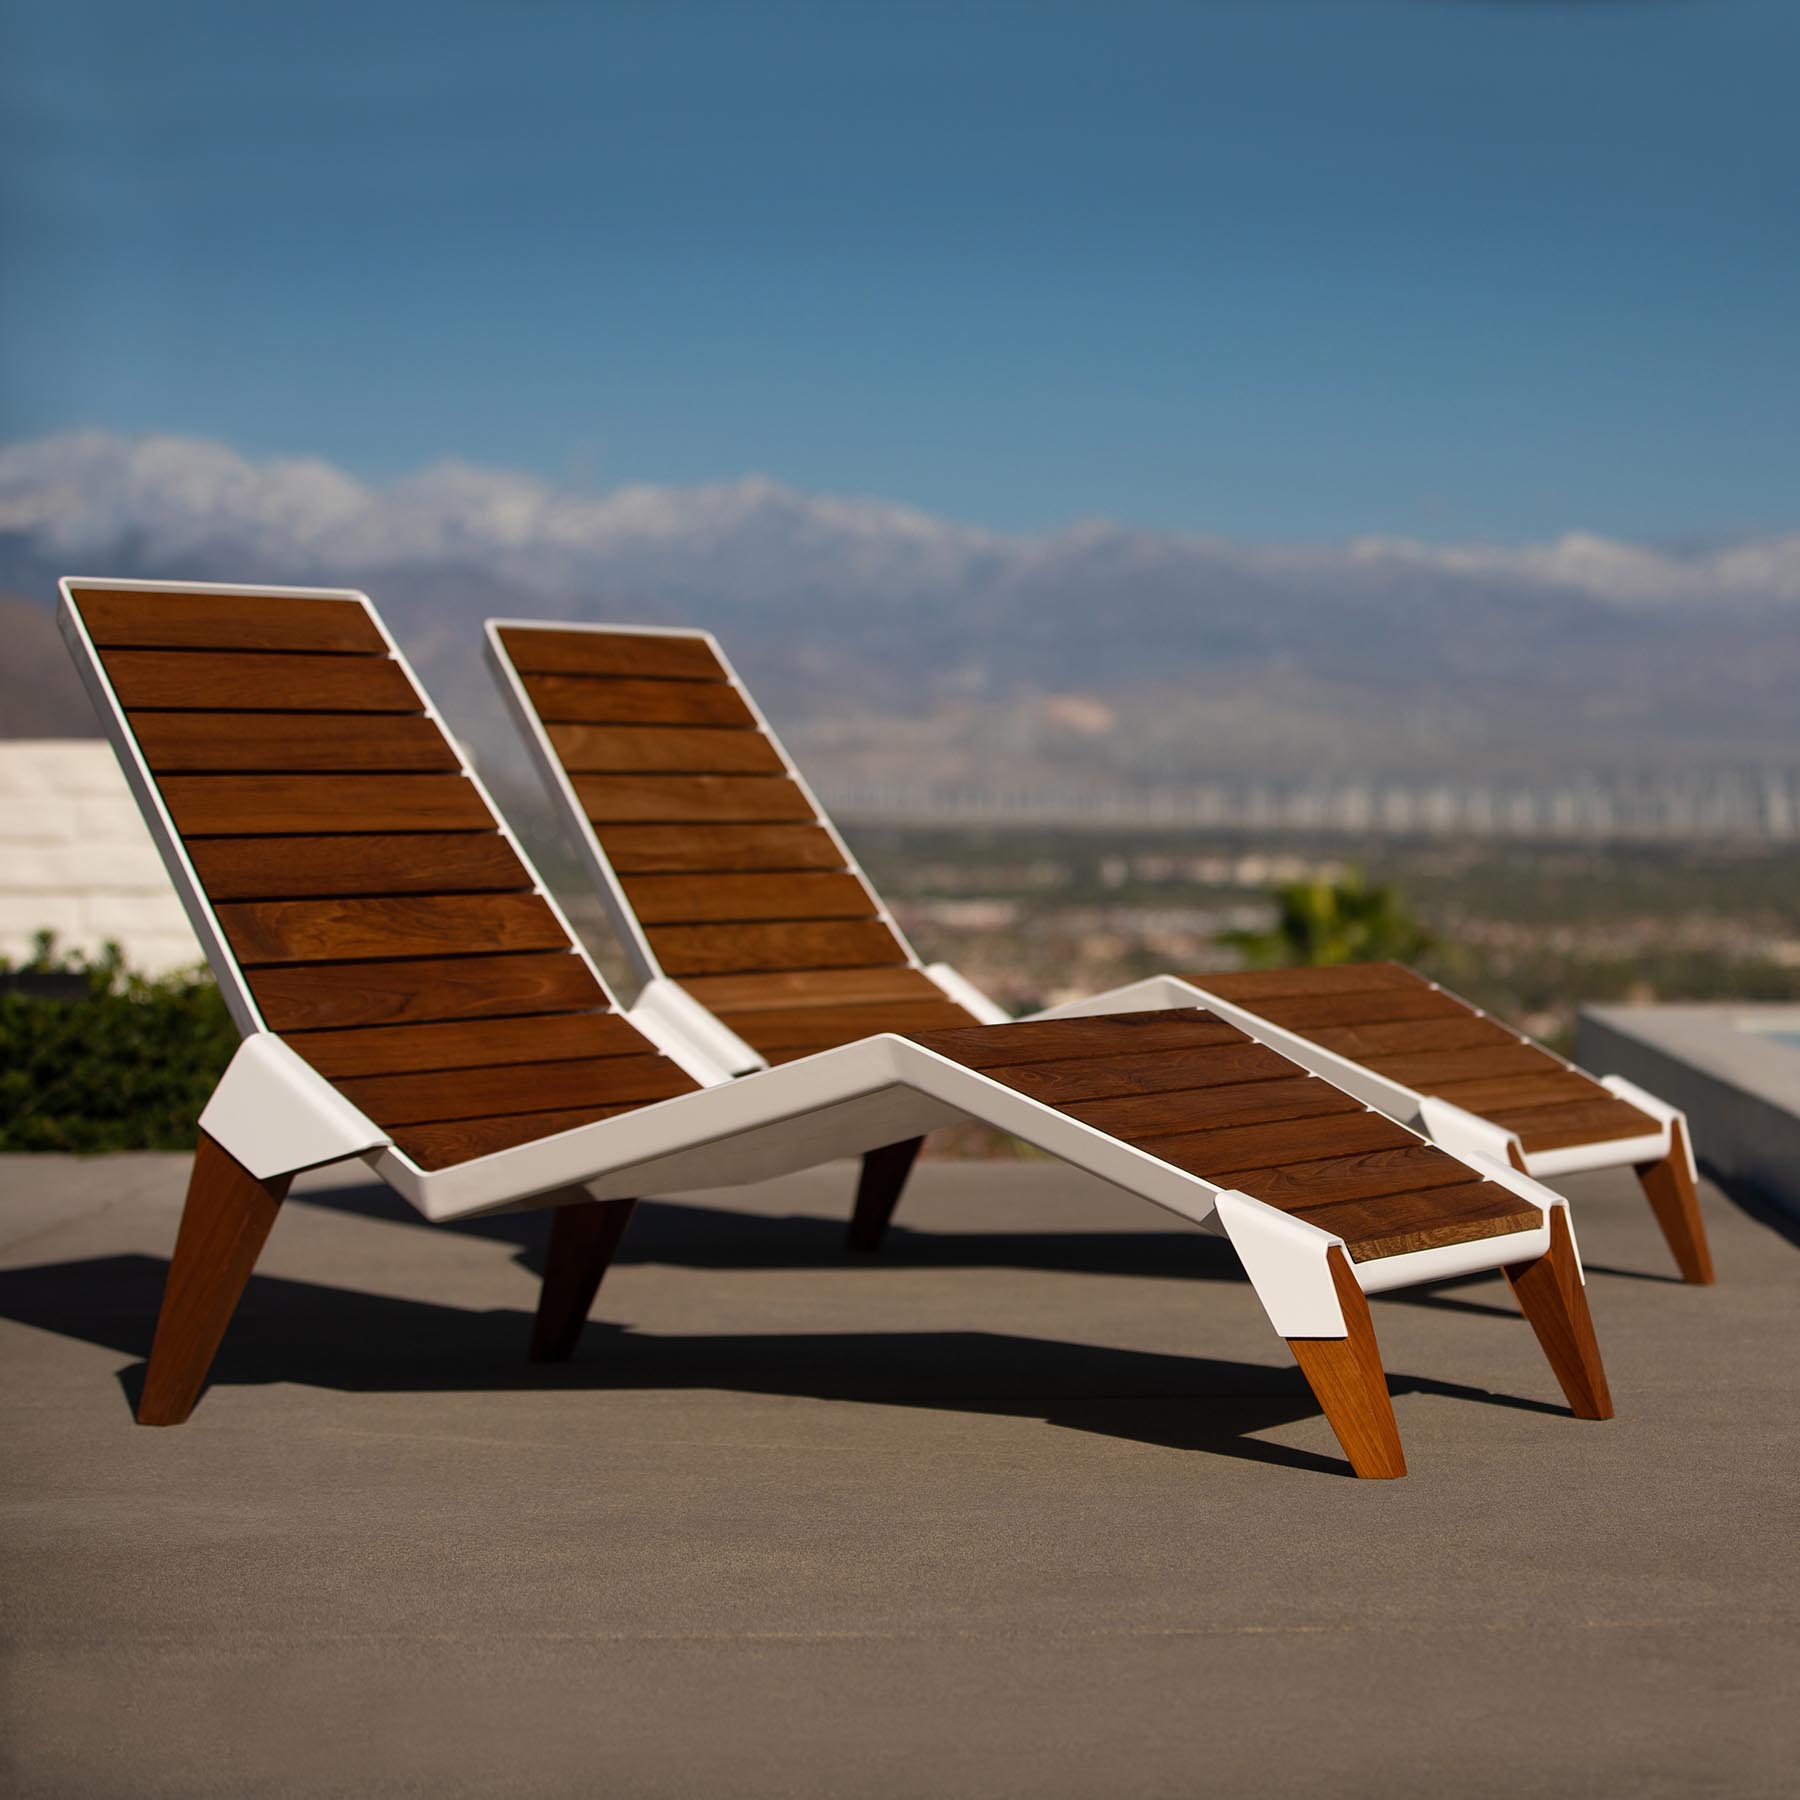 The Arms outdoor lounge chair gains inspiration from the feeling of peace and relaxation. The design was conceived and sketched while overlooking a couple resting on the beach. The angled back legs relate to a human form reminiscent of a person sitting on the ground leaning back with their weight on their arms.